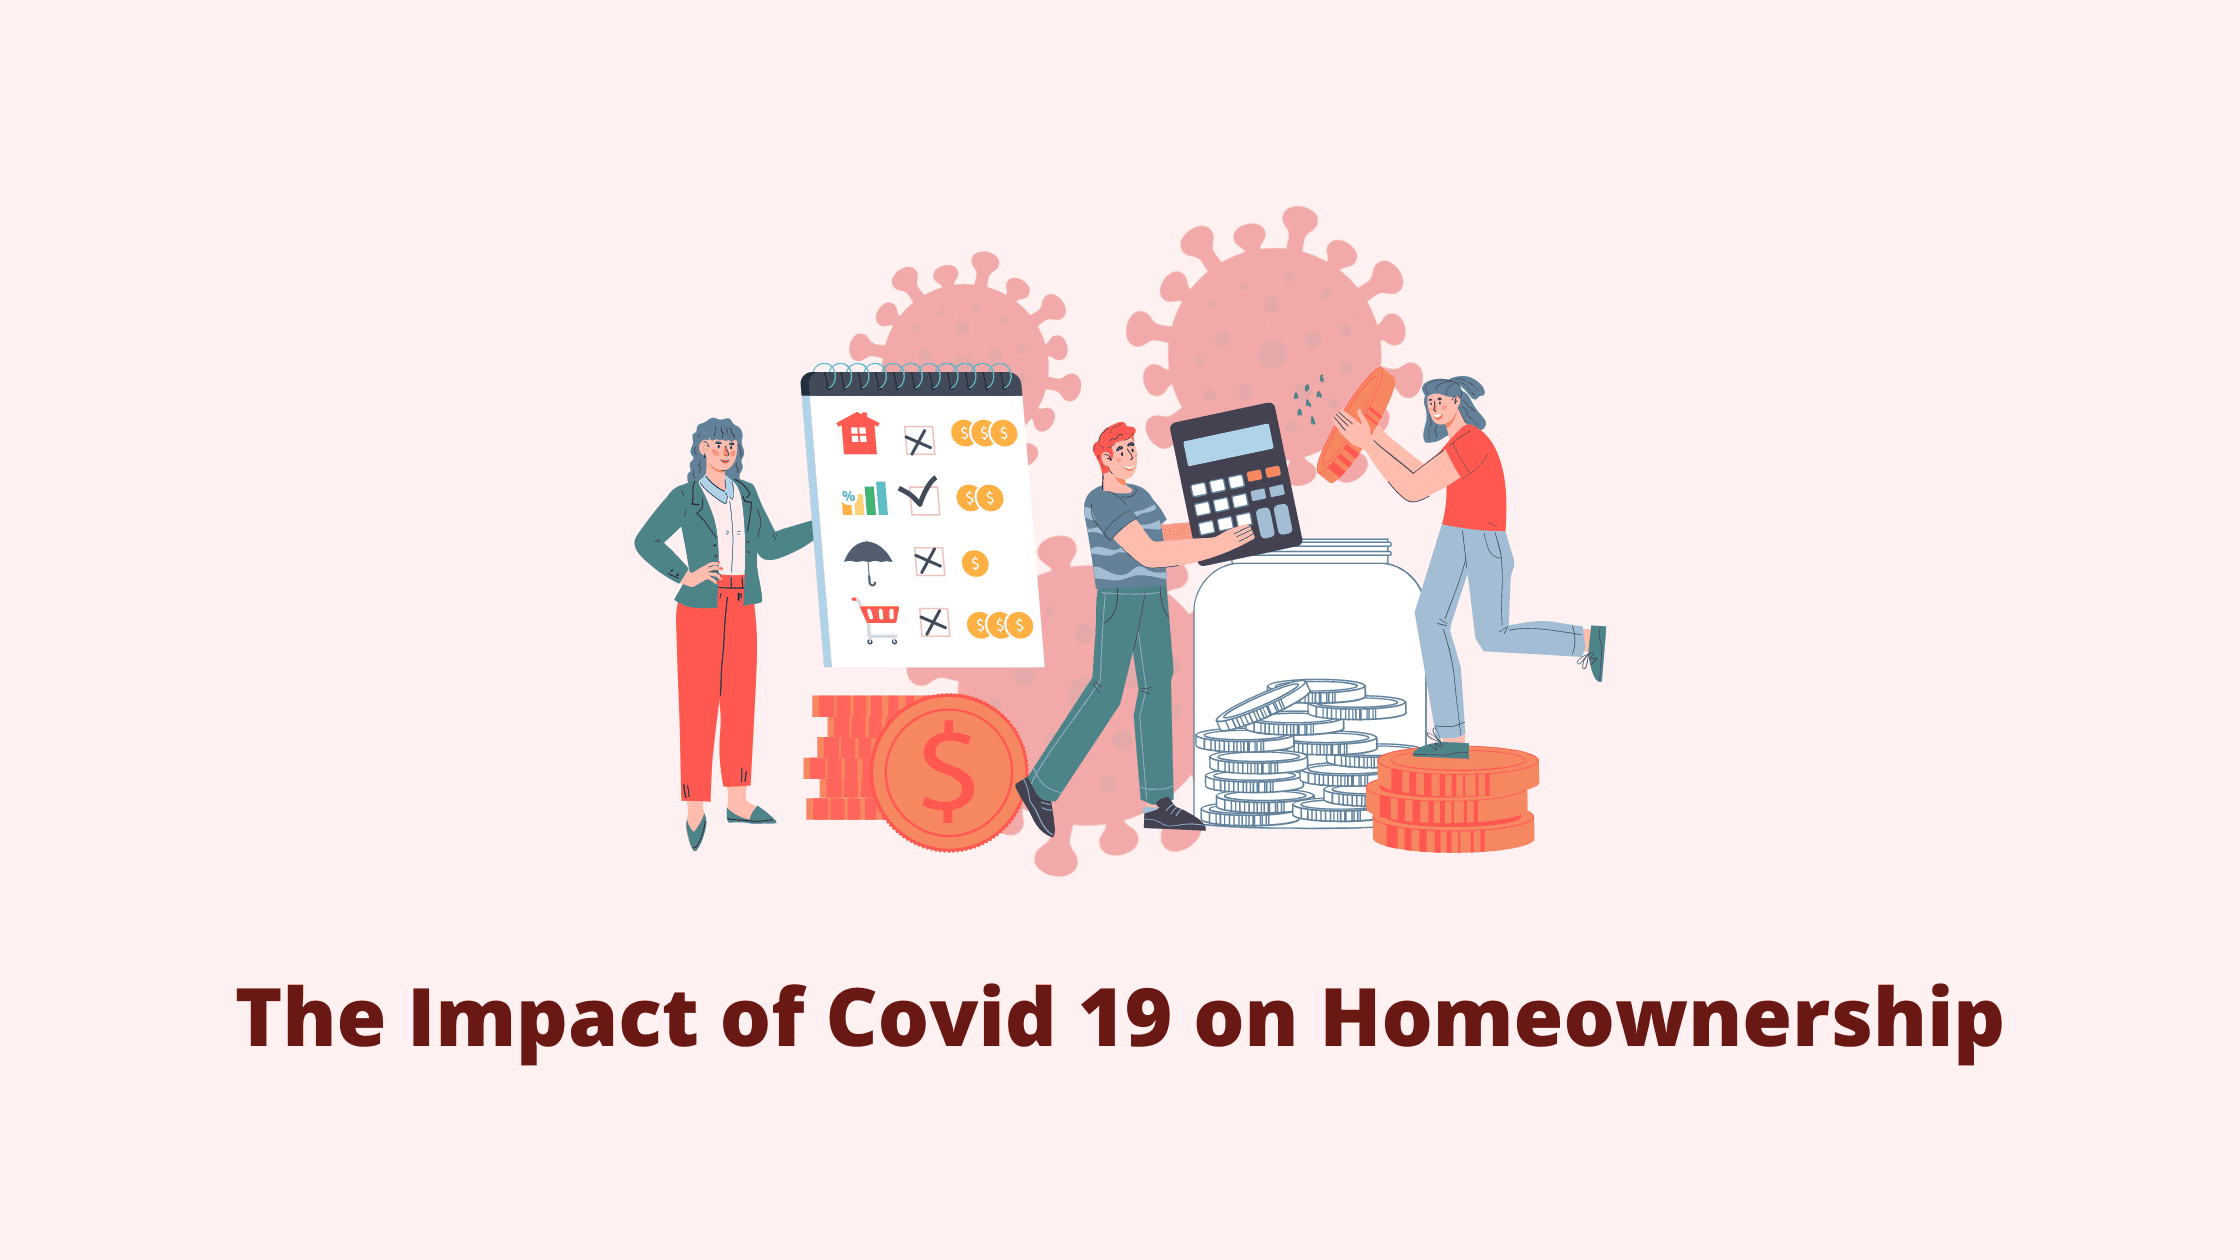 The Impact of Covid 19 on Homeownership